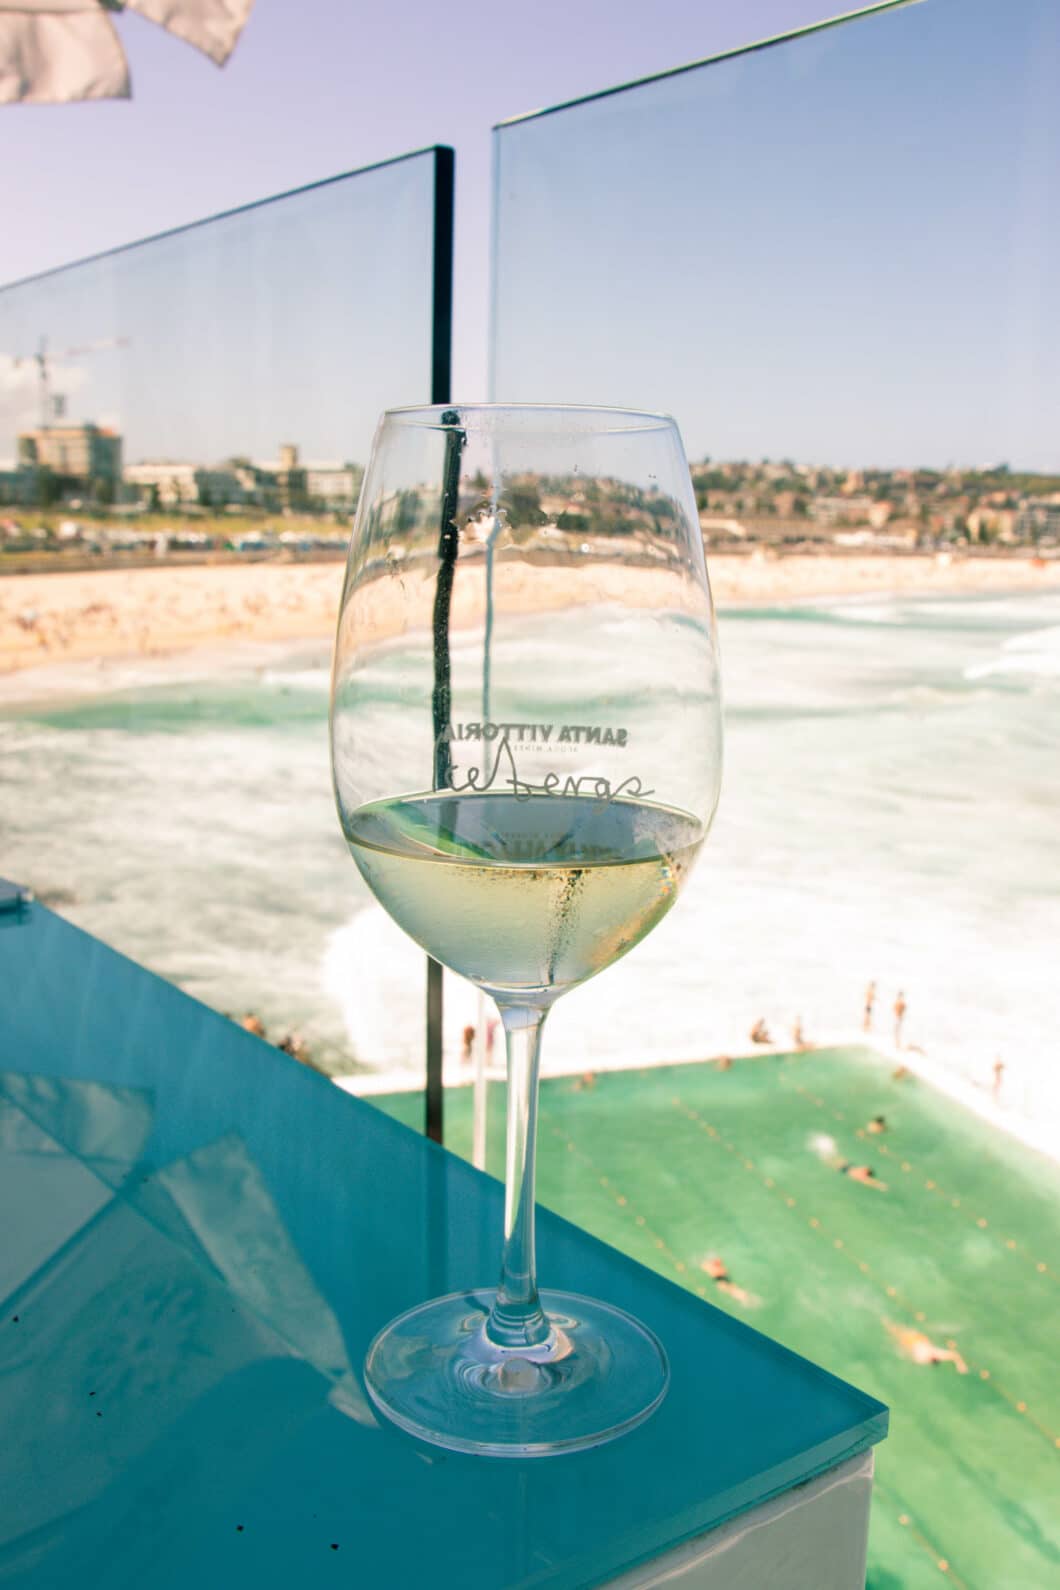 A glass of white win rests on a glass table. In the background, there's a pool that overlooks the ocean and a shoreline filled with people enjoying the clear, sunny day.